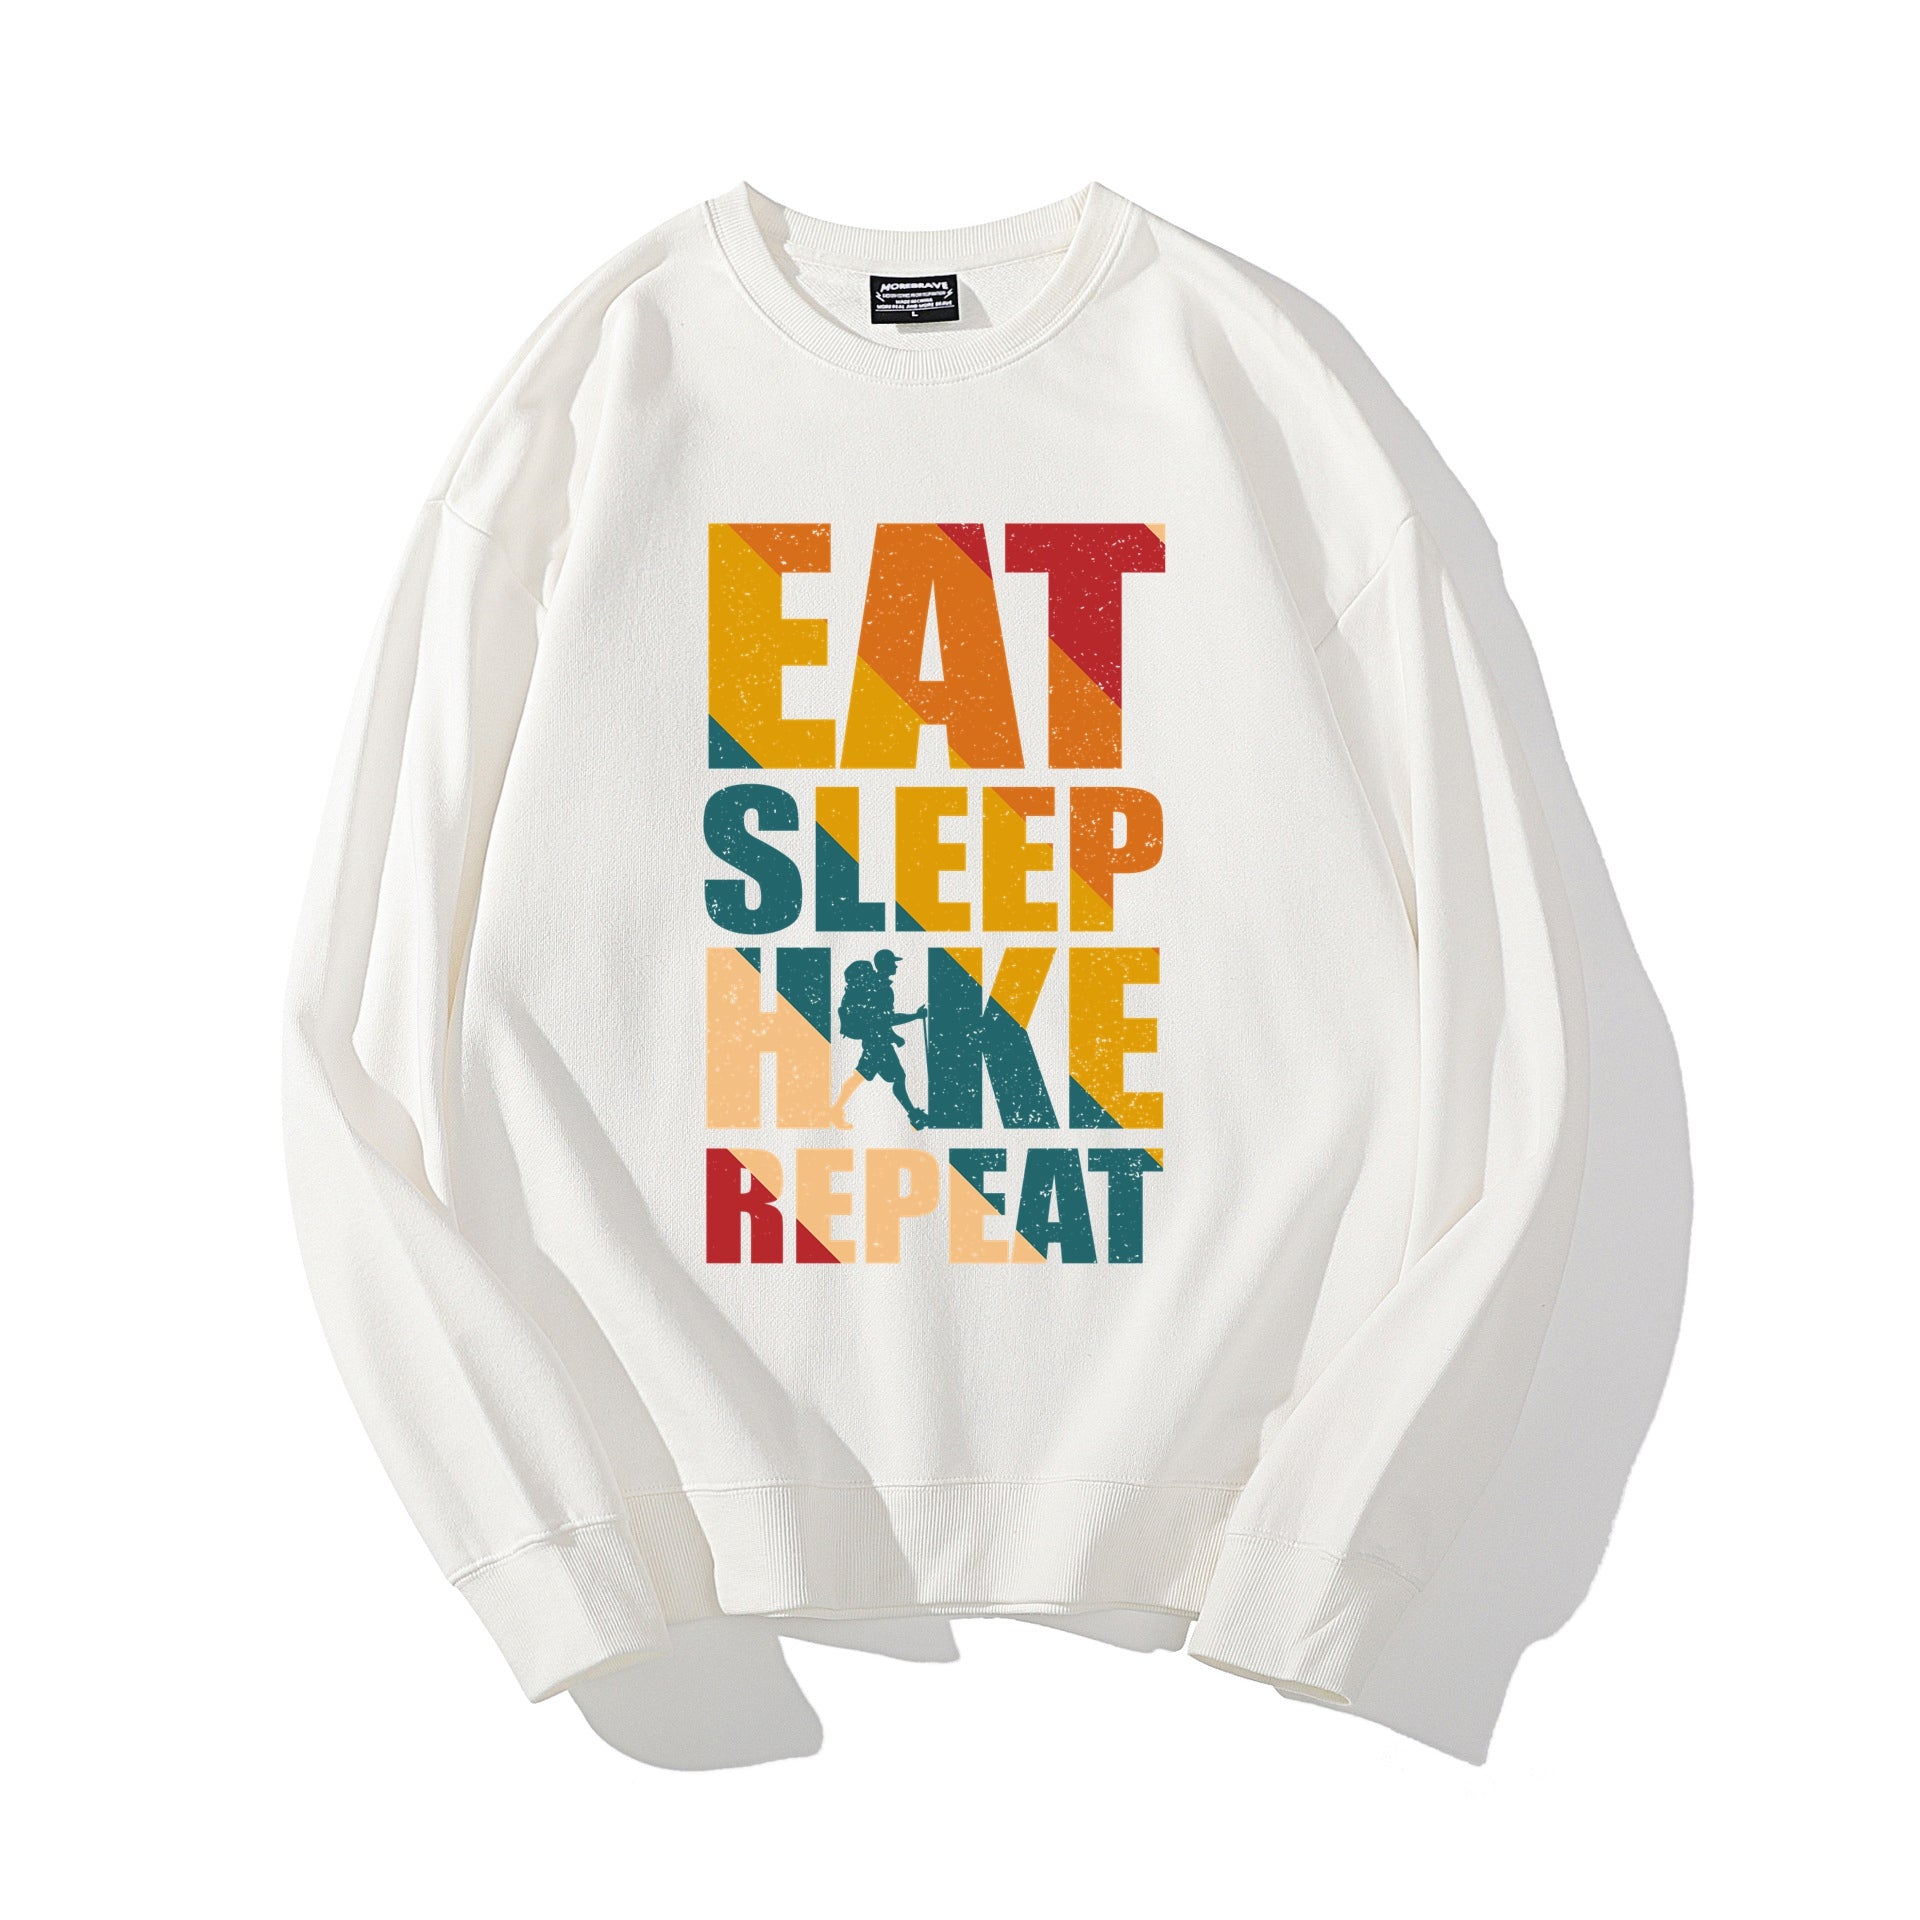 Hiking Sweater for Men Letter Graphic Printed Sweatshirt Autumn Winter Cotton Tops